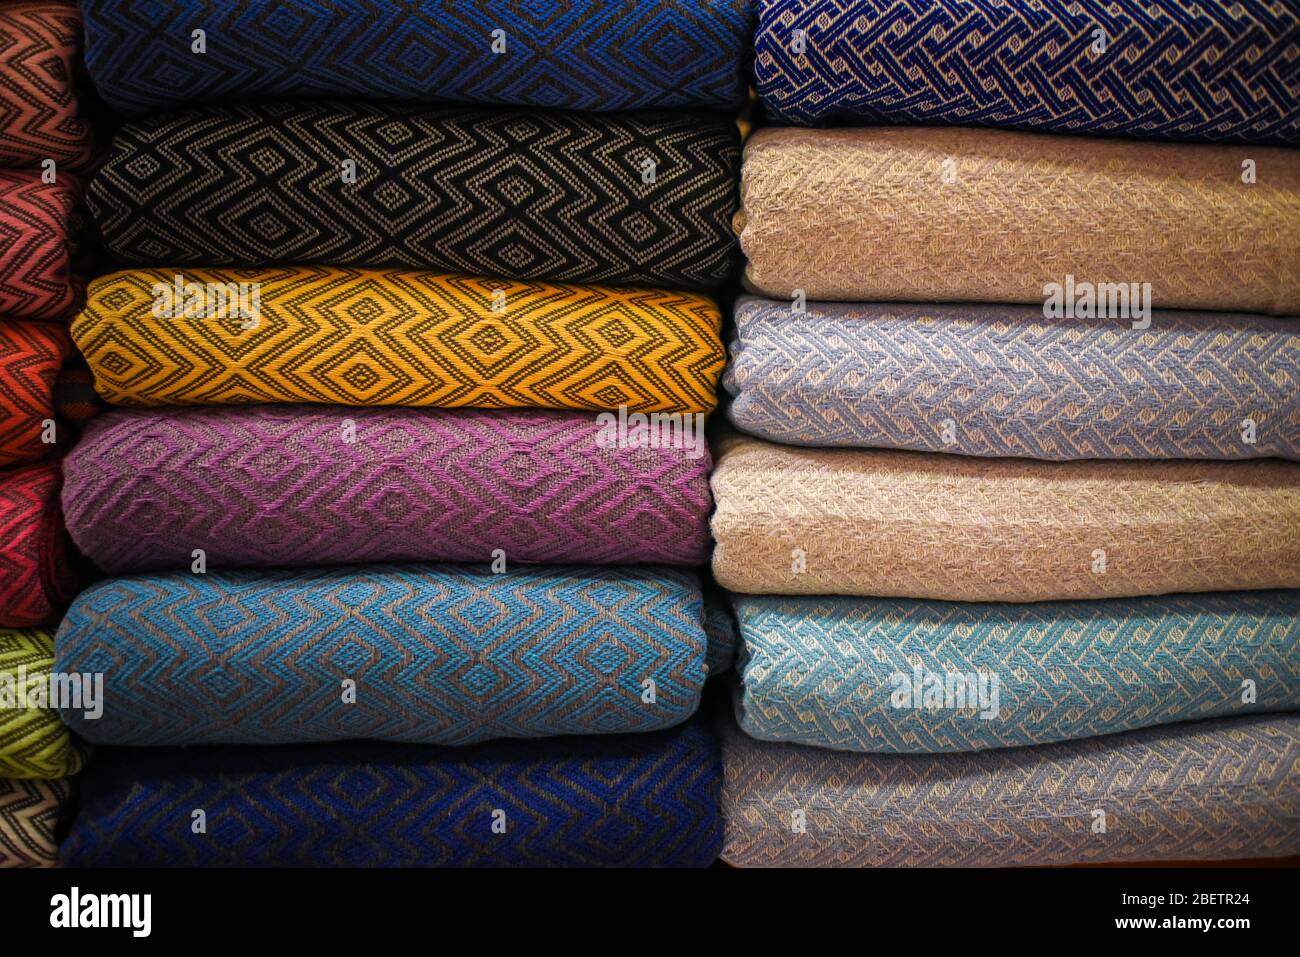 stacked multicolored clothing fabric in the closet bed linen banner. Stock Photo